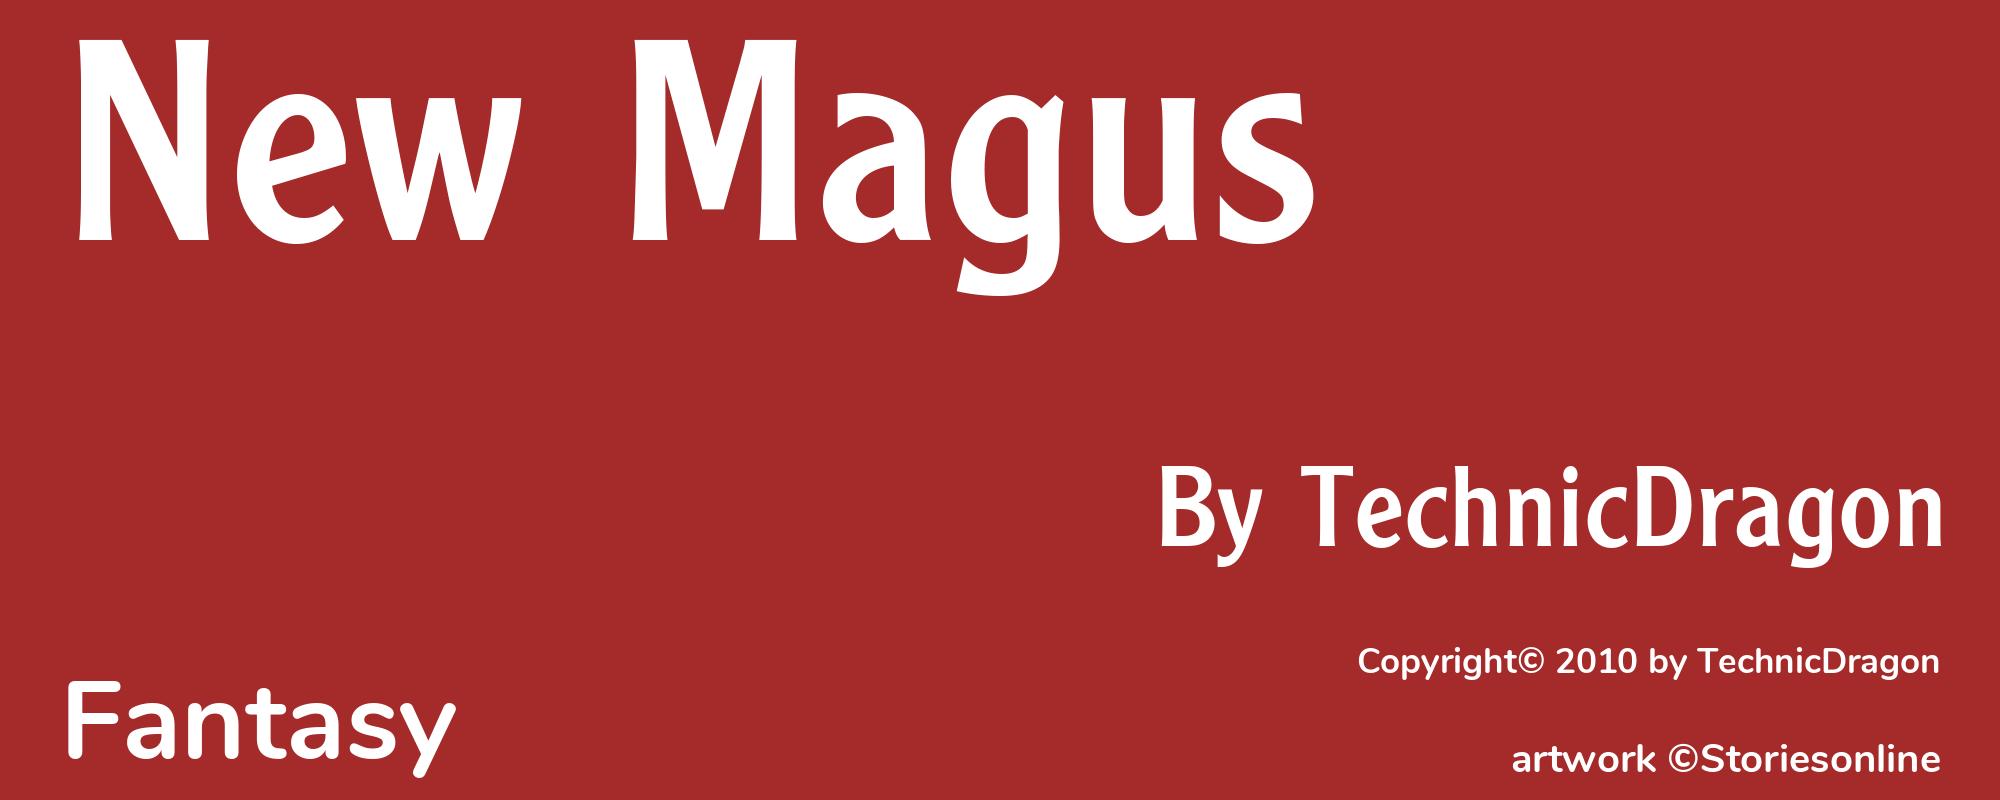 New Magus - Cover